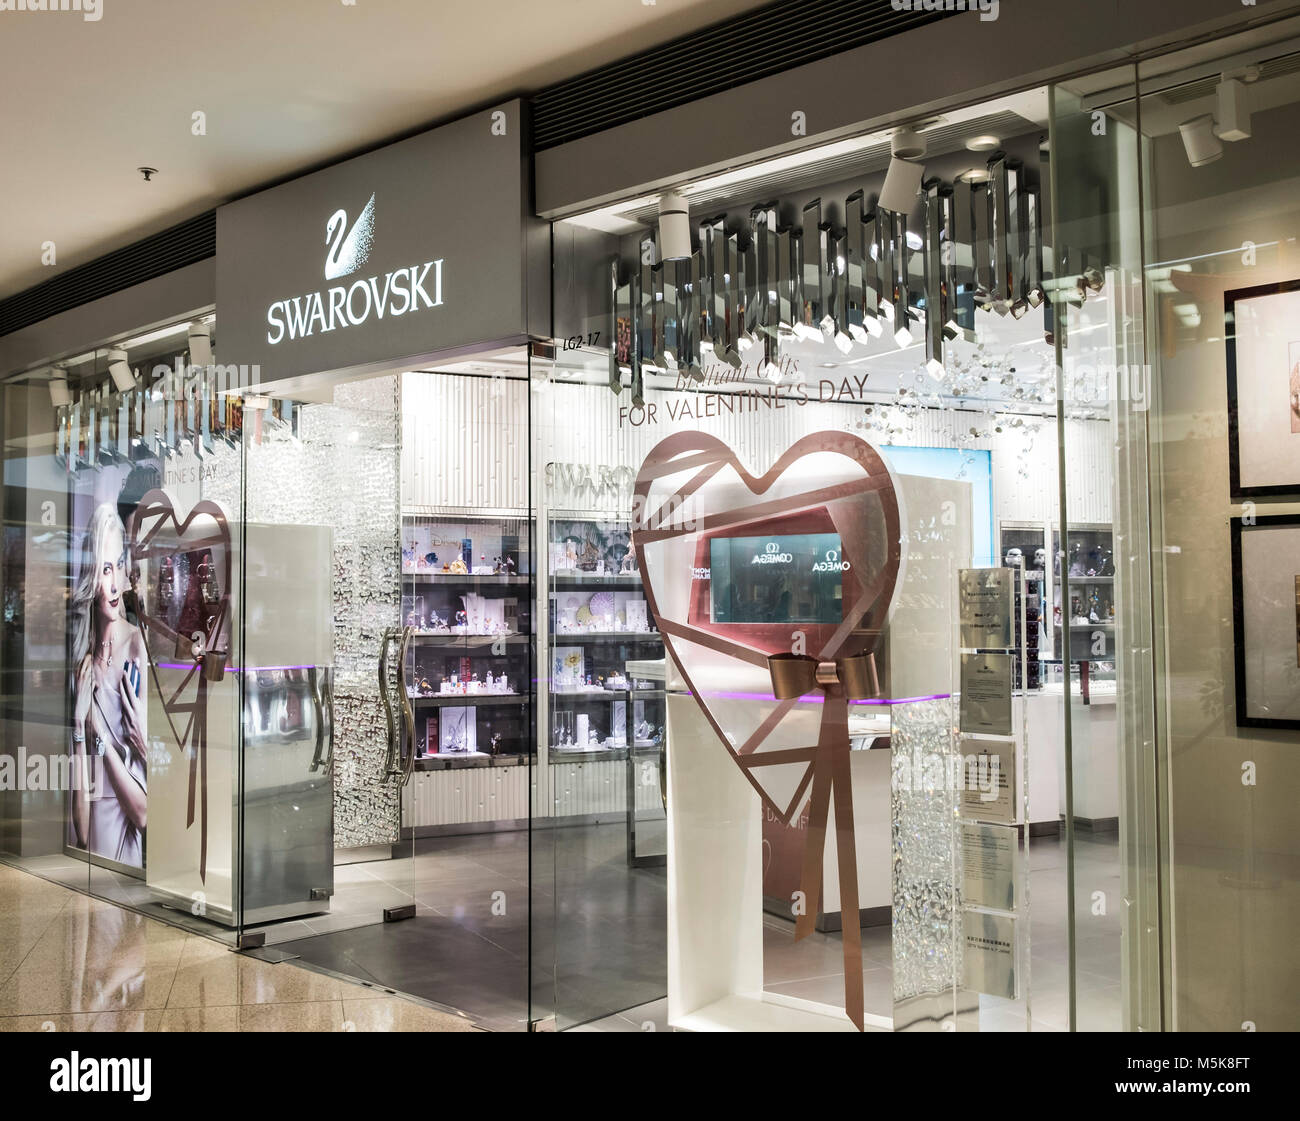 Swarovski Store Front High Resolution Stock Photography and Images - Alamy